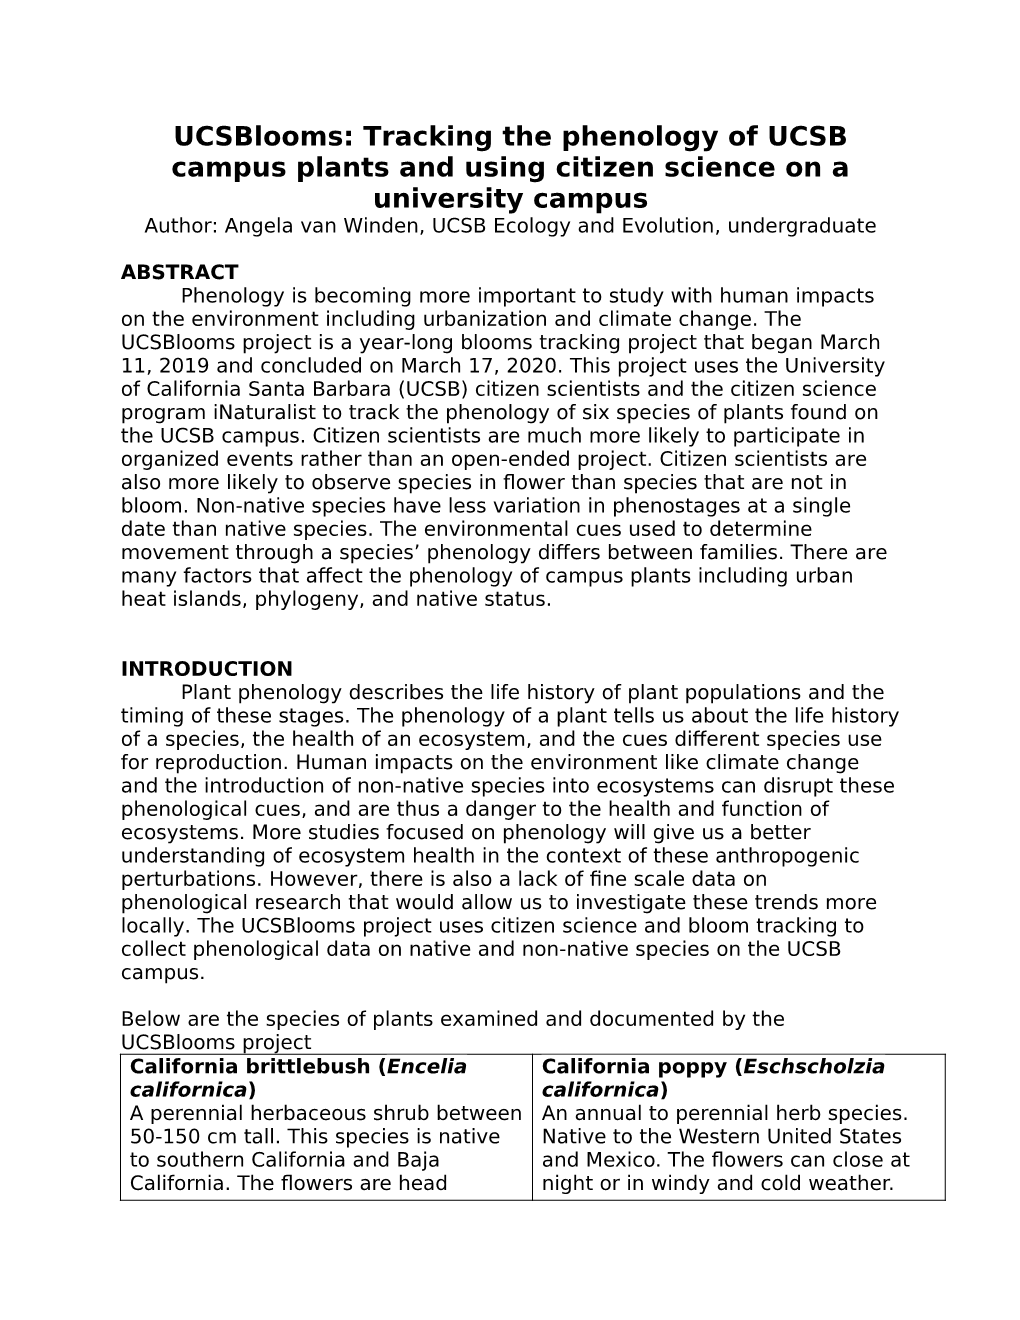 Ucsblooms: Tracking the Phenology of UCSB Campus Plants and Using